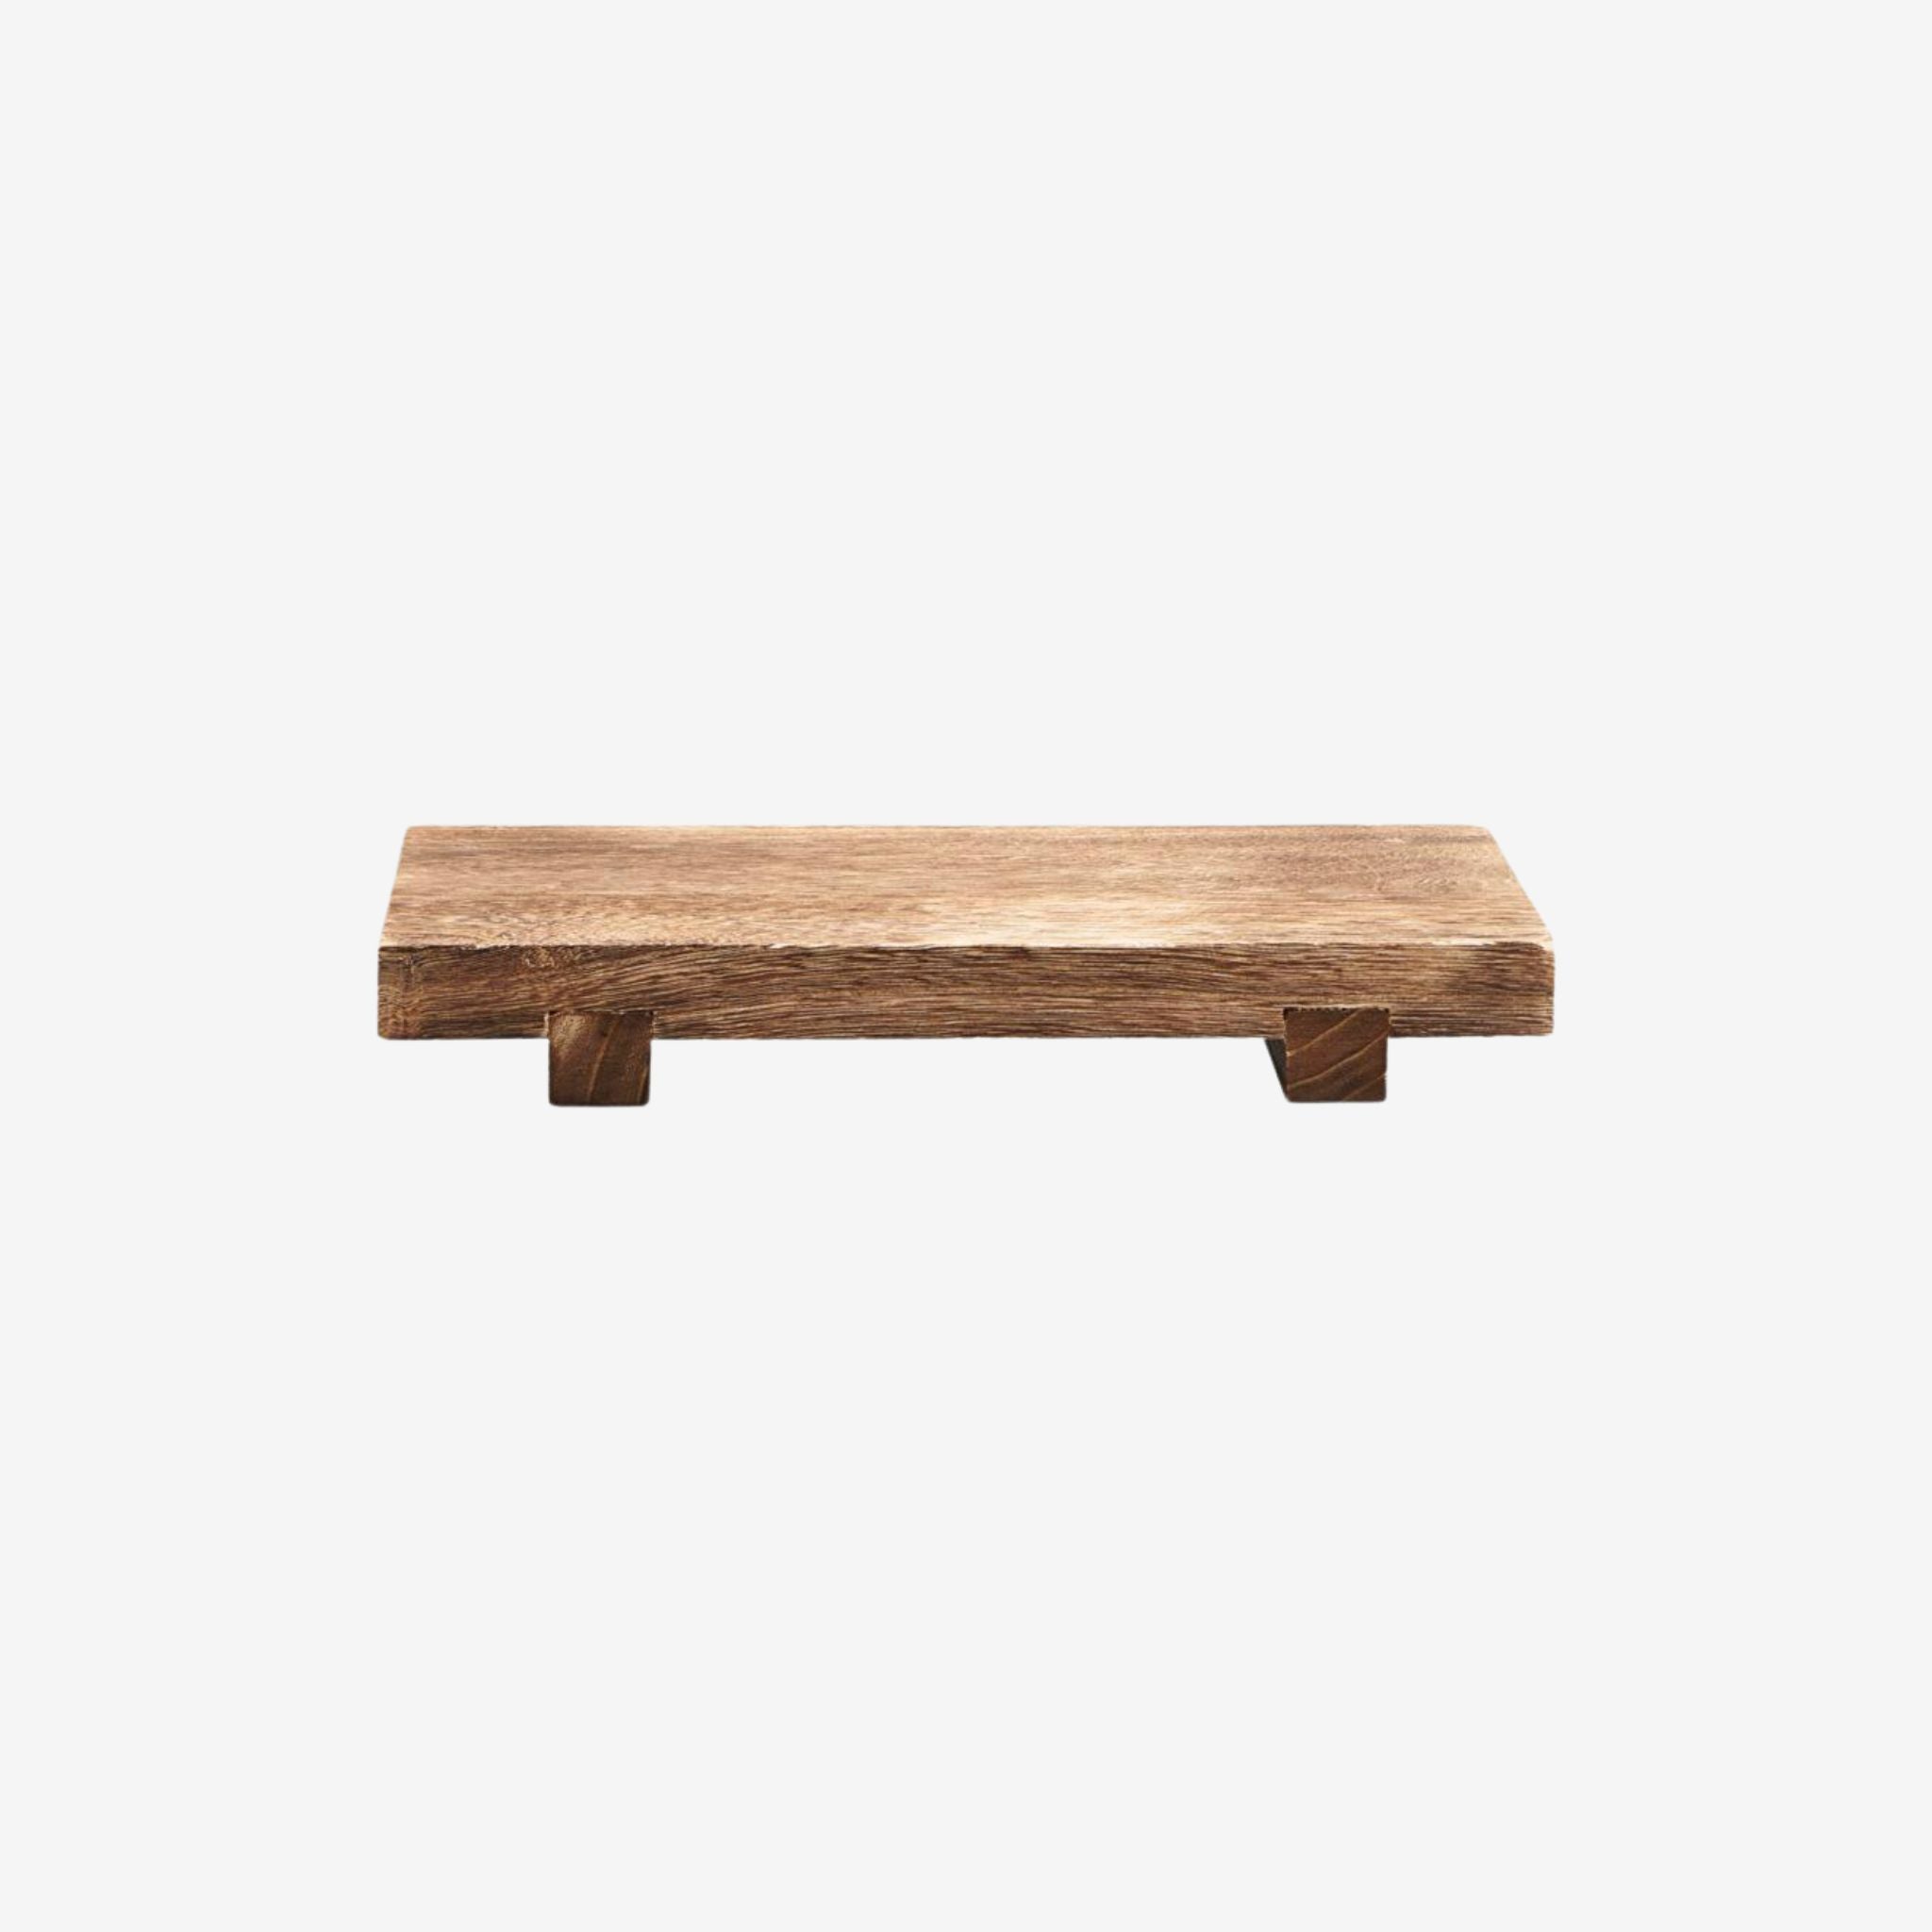 DECORATIVE WOODEN TRAY - SMALL - Simply Elevated Home Furnishings 